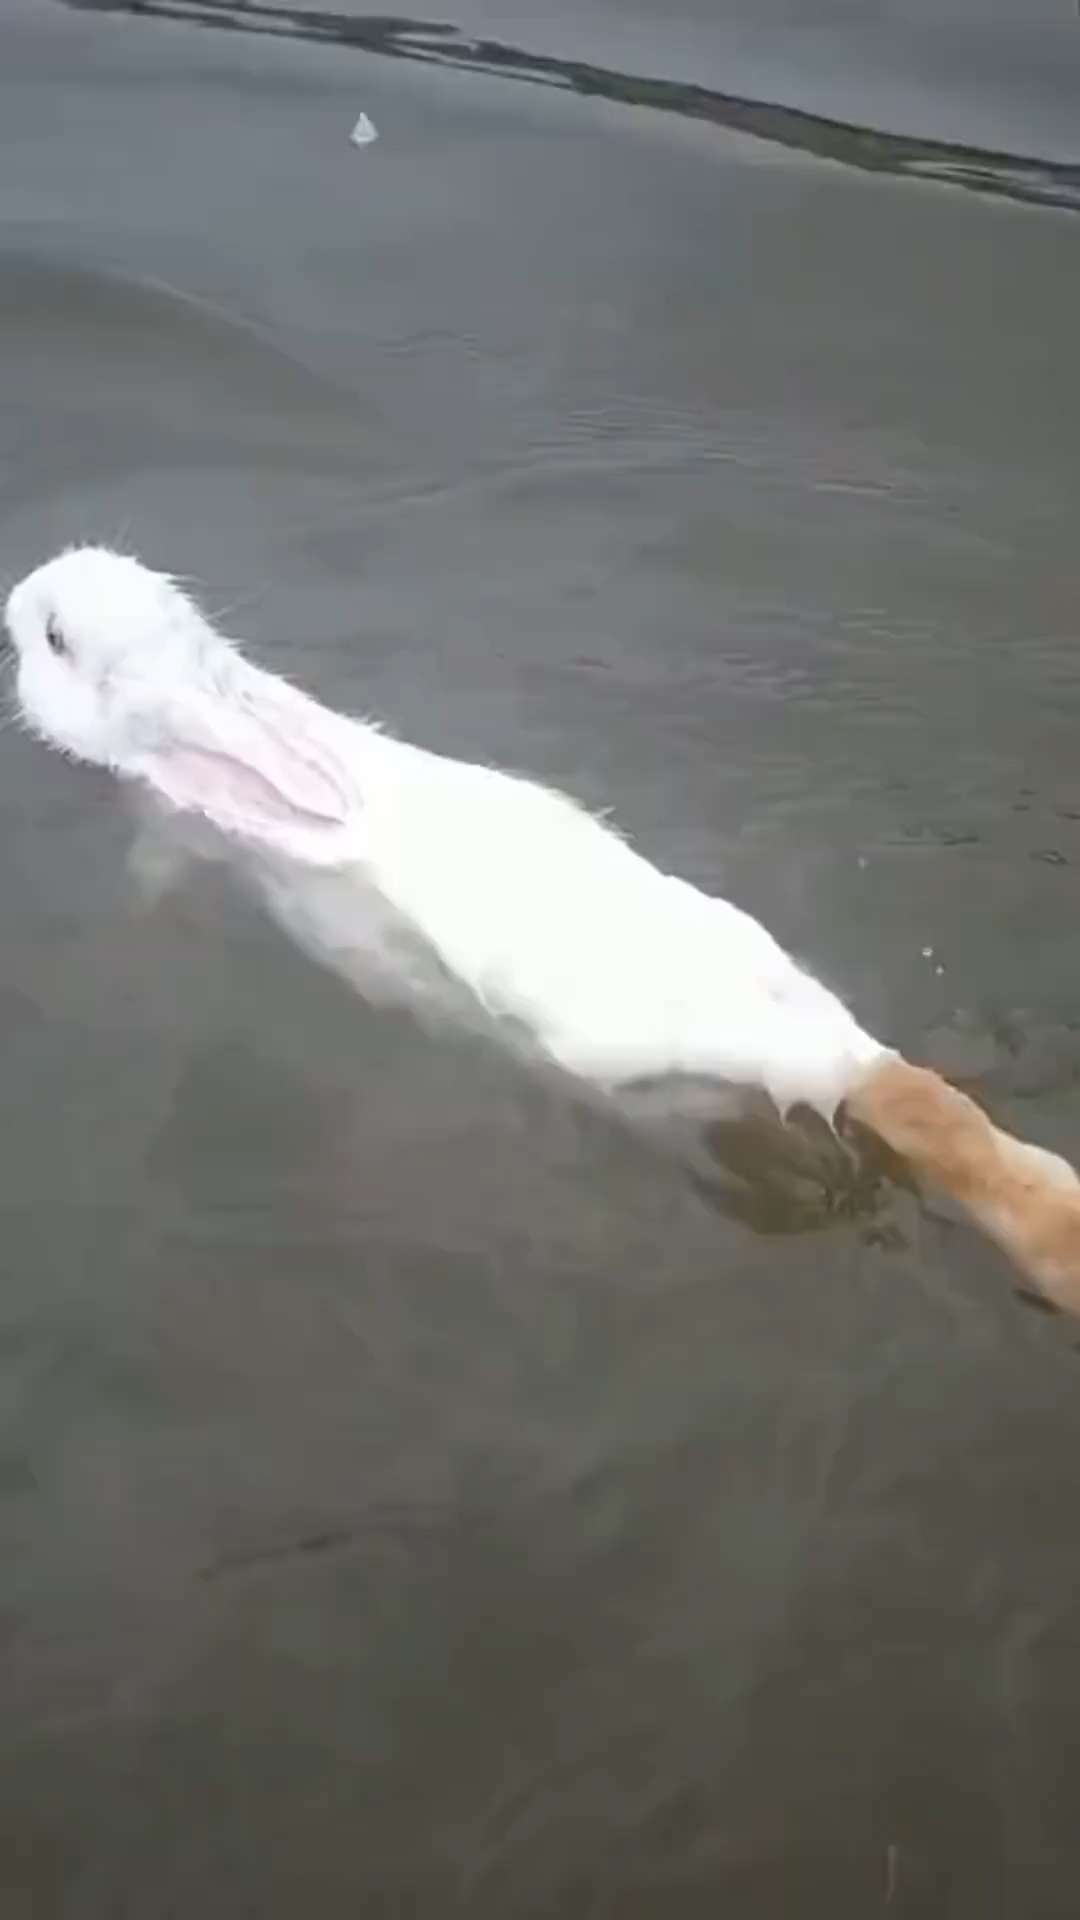 Have you ever seen a rabbit swim?